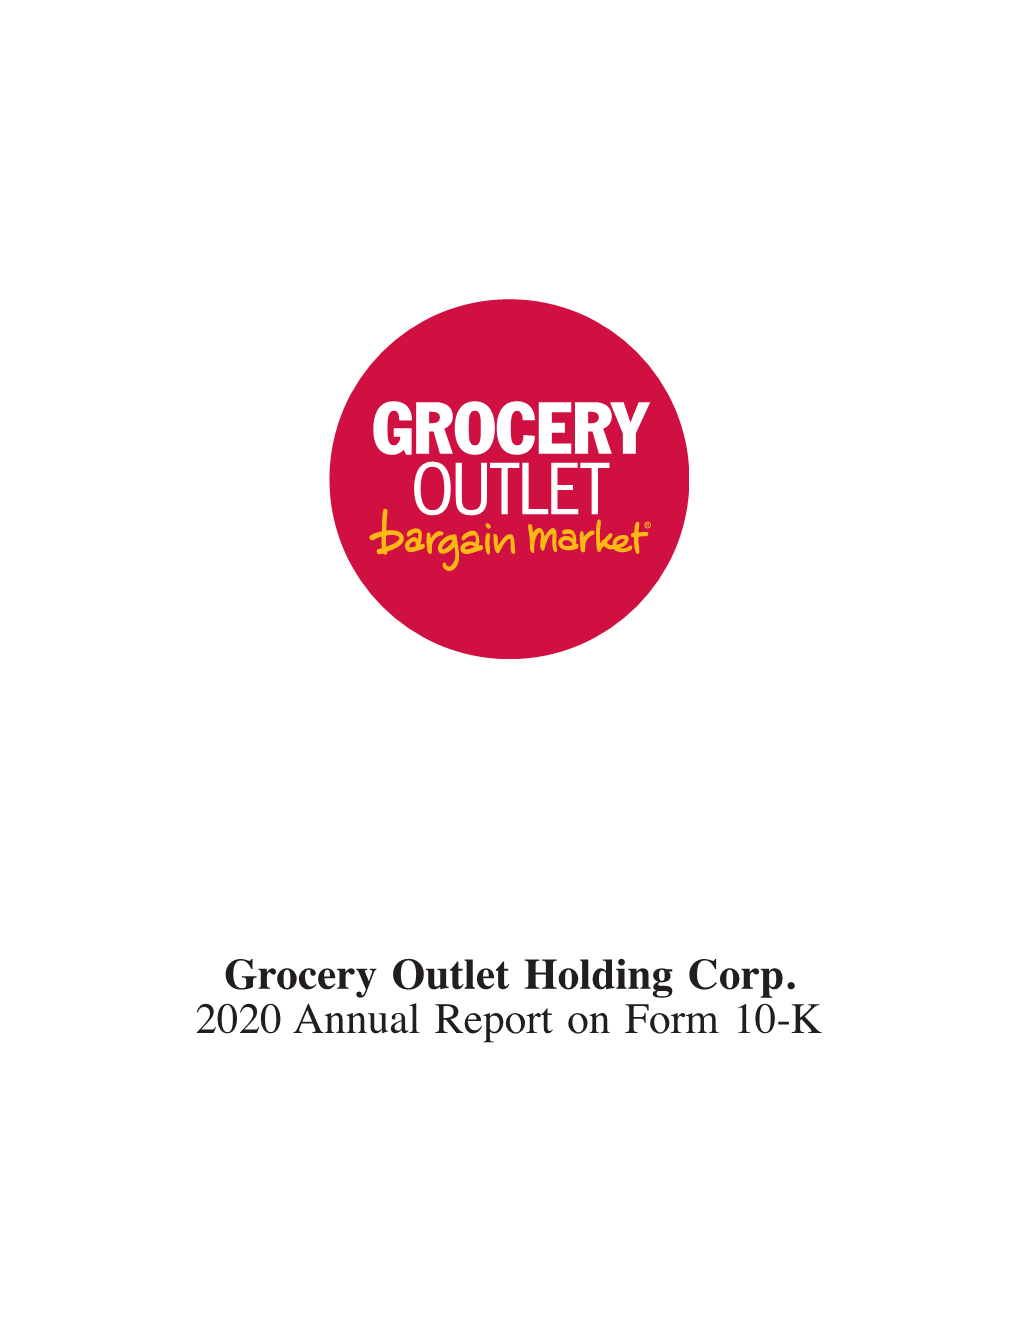 Grocery Outlet Holding Corp. 2020 Annual Report on Form 10-K